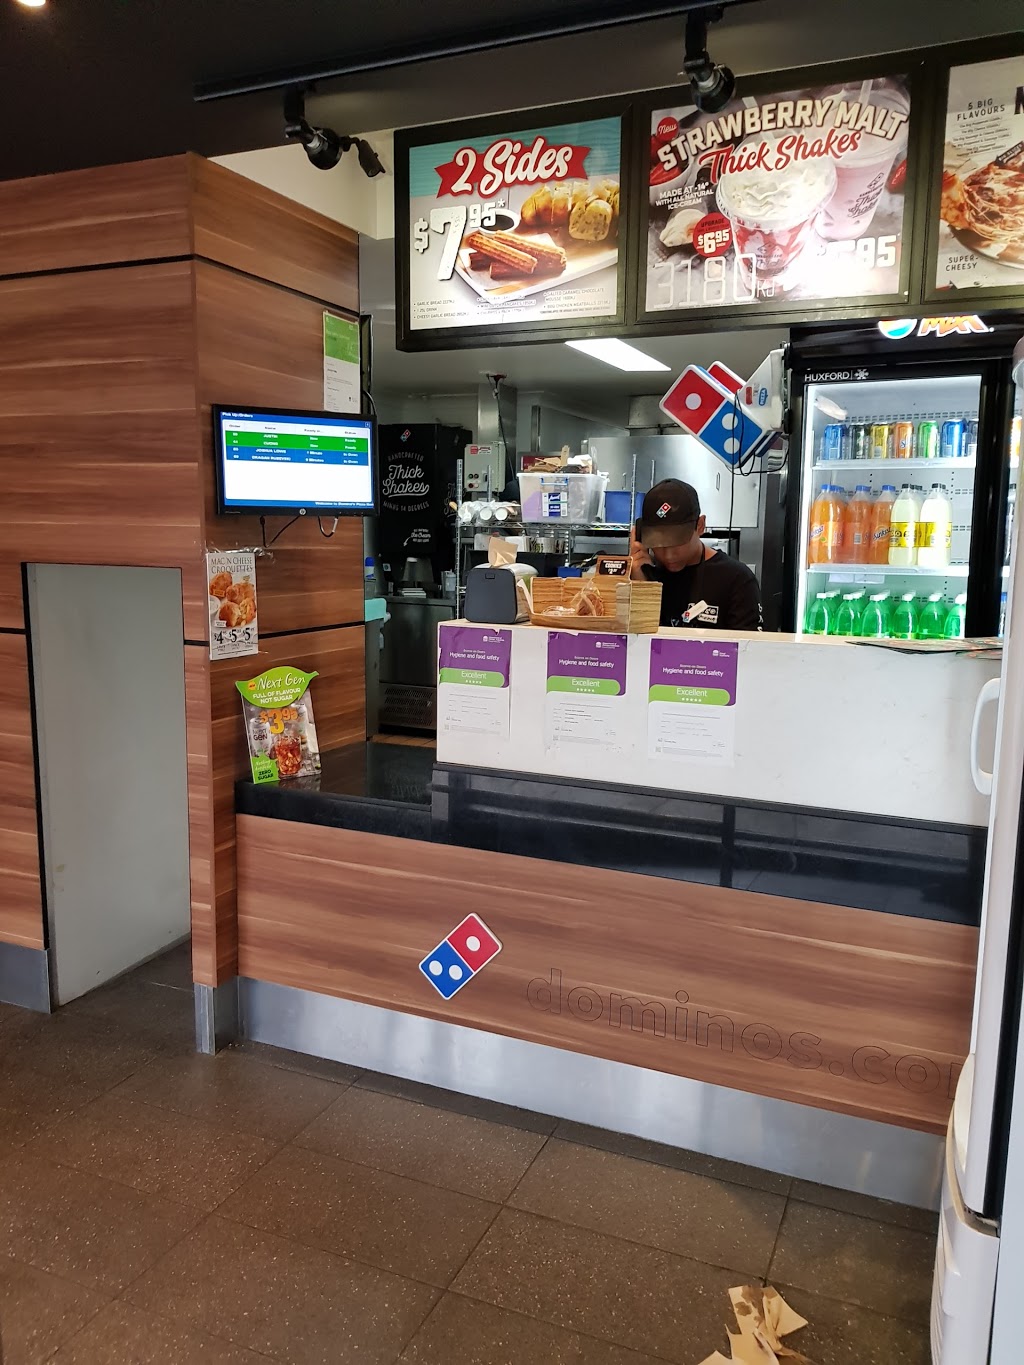 Dominos Pizza North Strathfield | meal takeaway | 223 Concord Rd, North Strathfield NSW 2137, Australia | 0287584520 OR +61 2 8758 4520